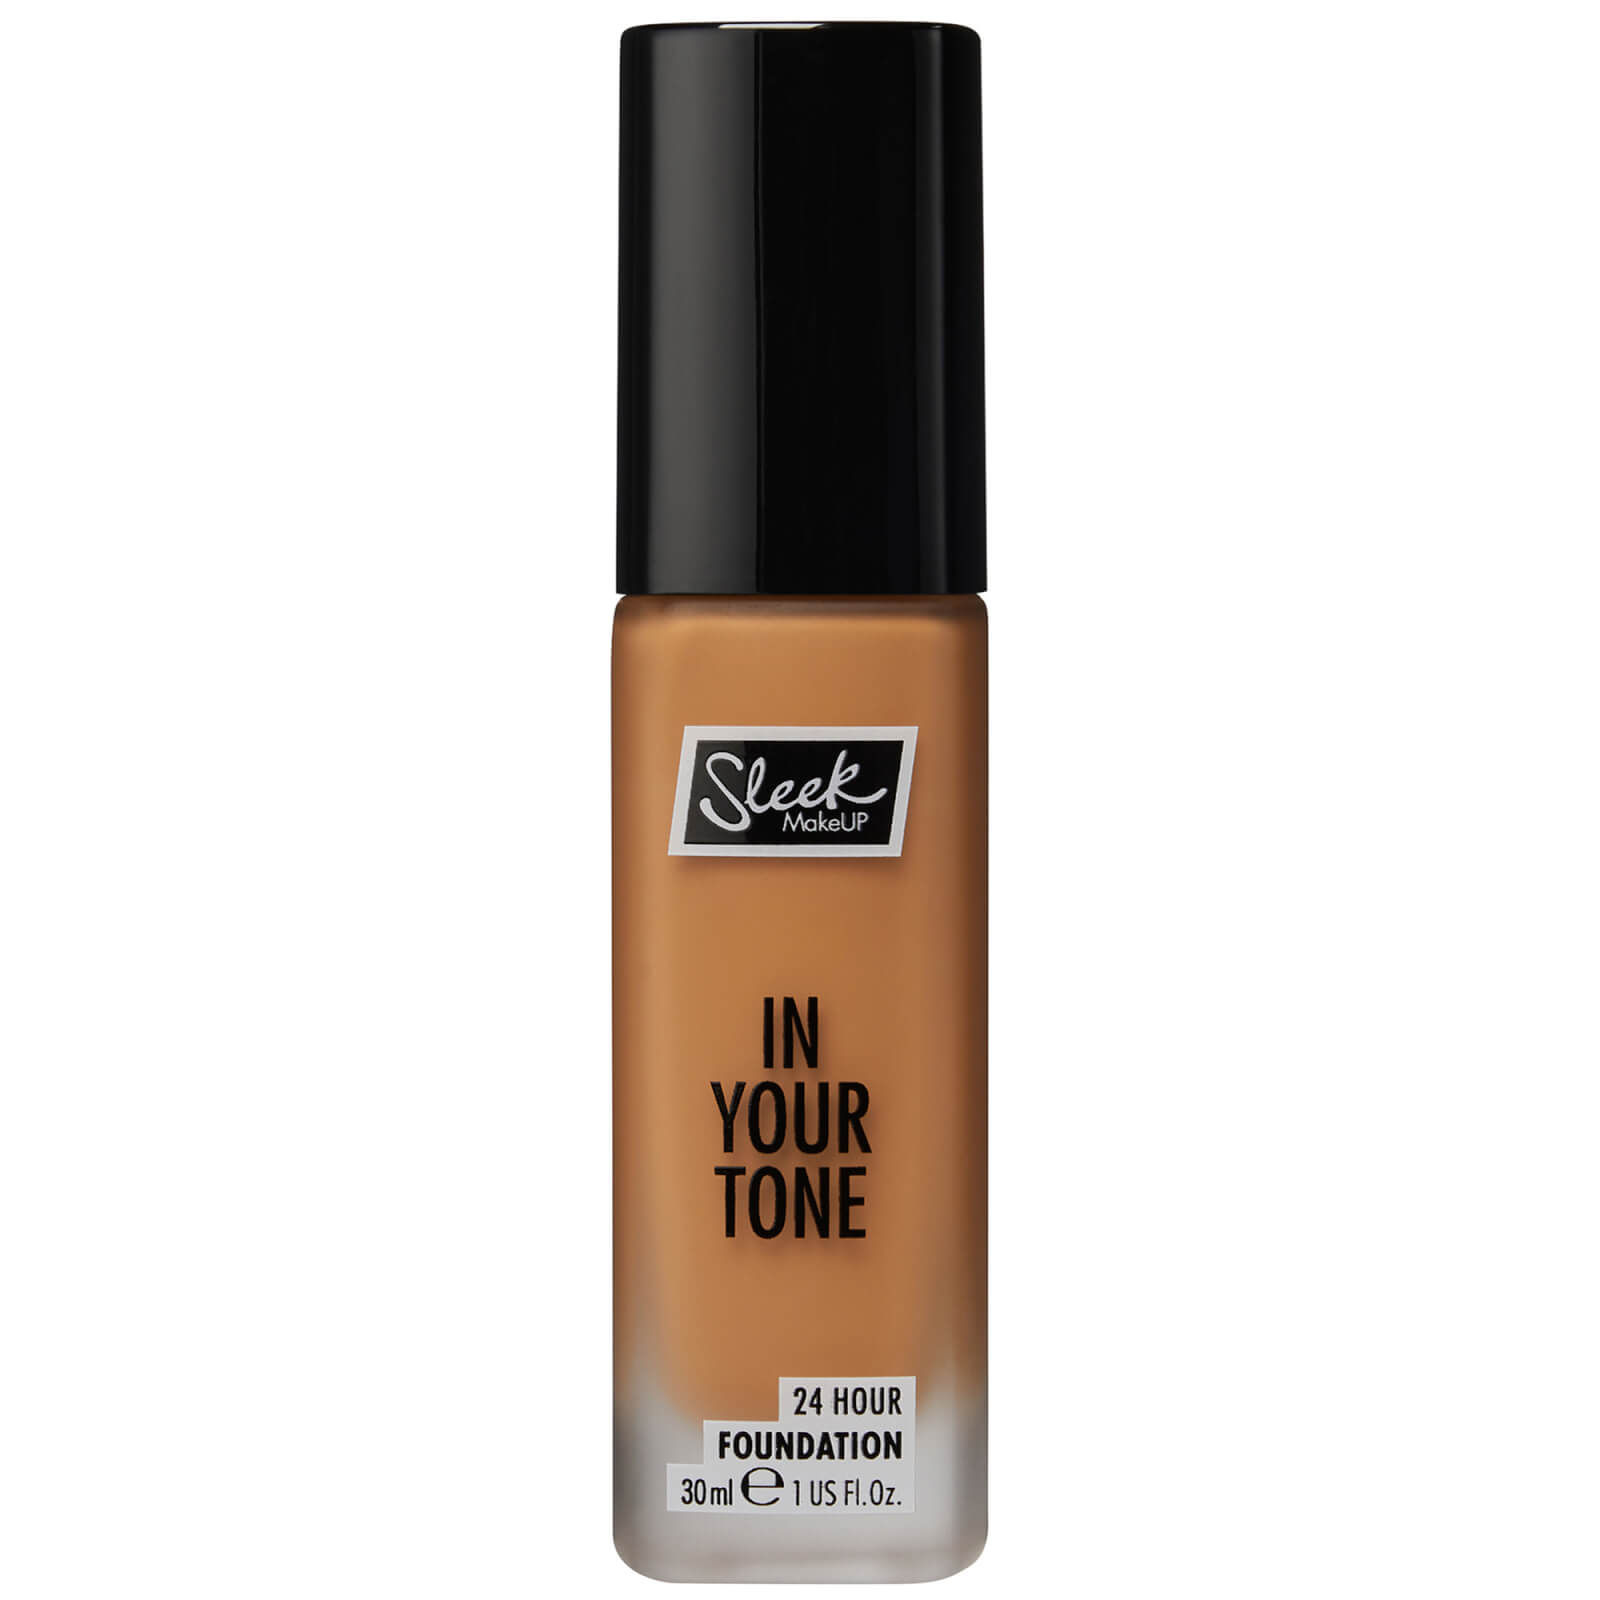 Sleek MakeUP in Your Tone 24 Hour Foundation 30ml (Various Shades) - 6W